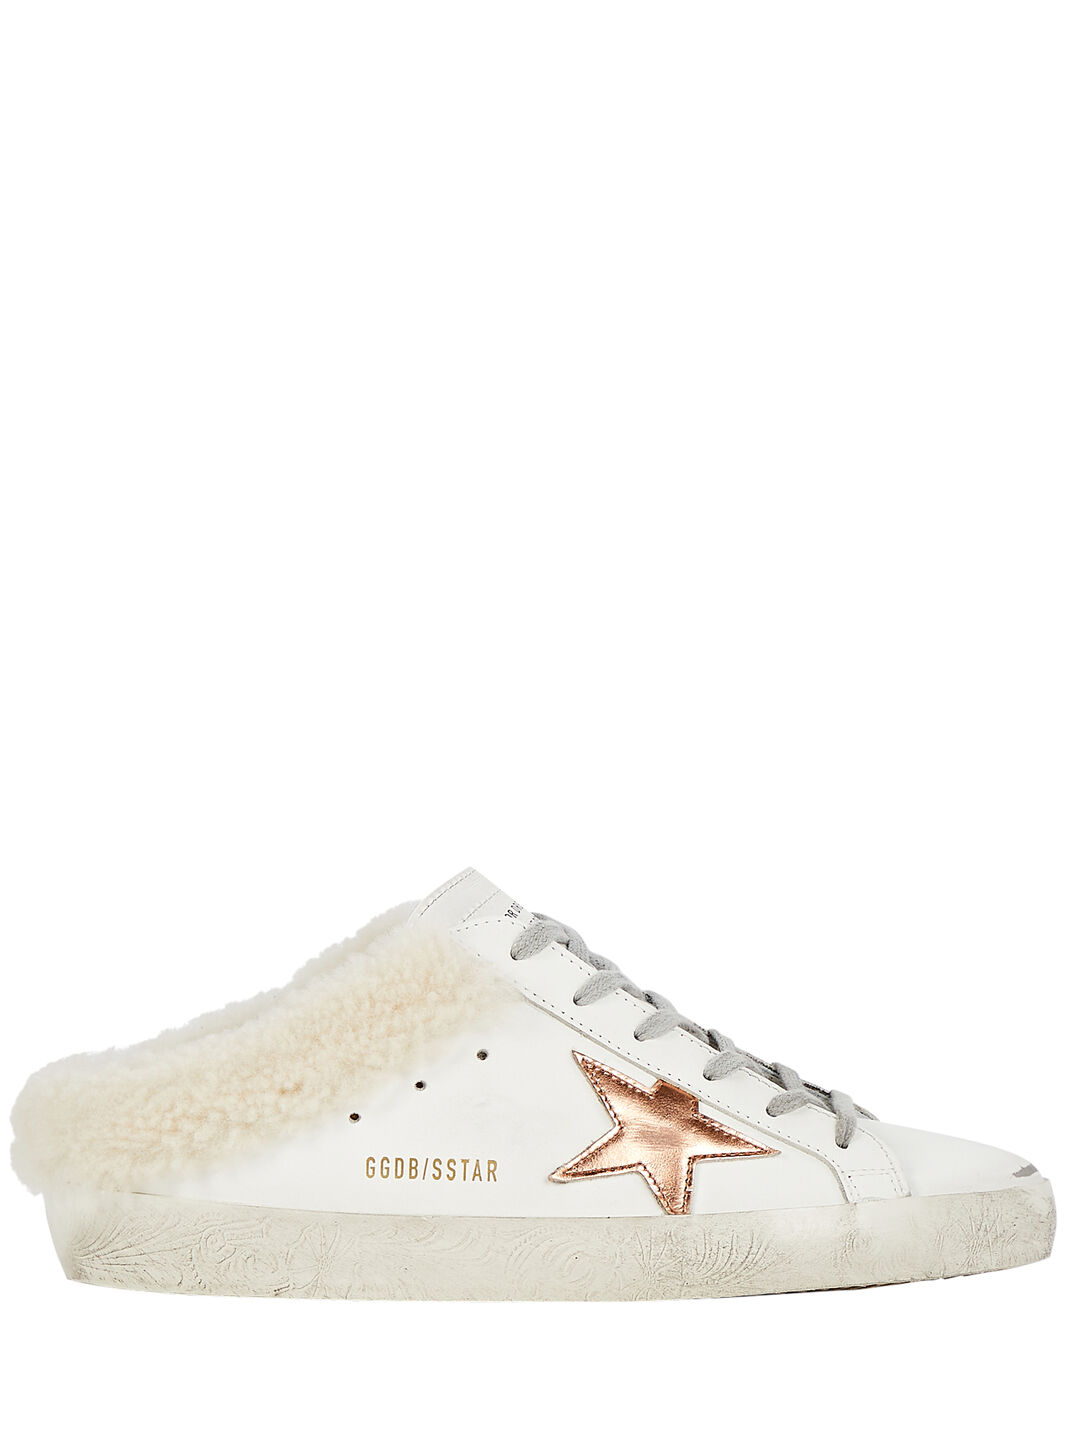 Superstar Sabot Shearling-Lined Sneakers